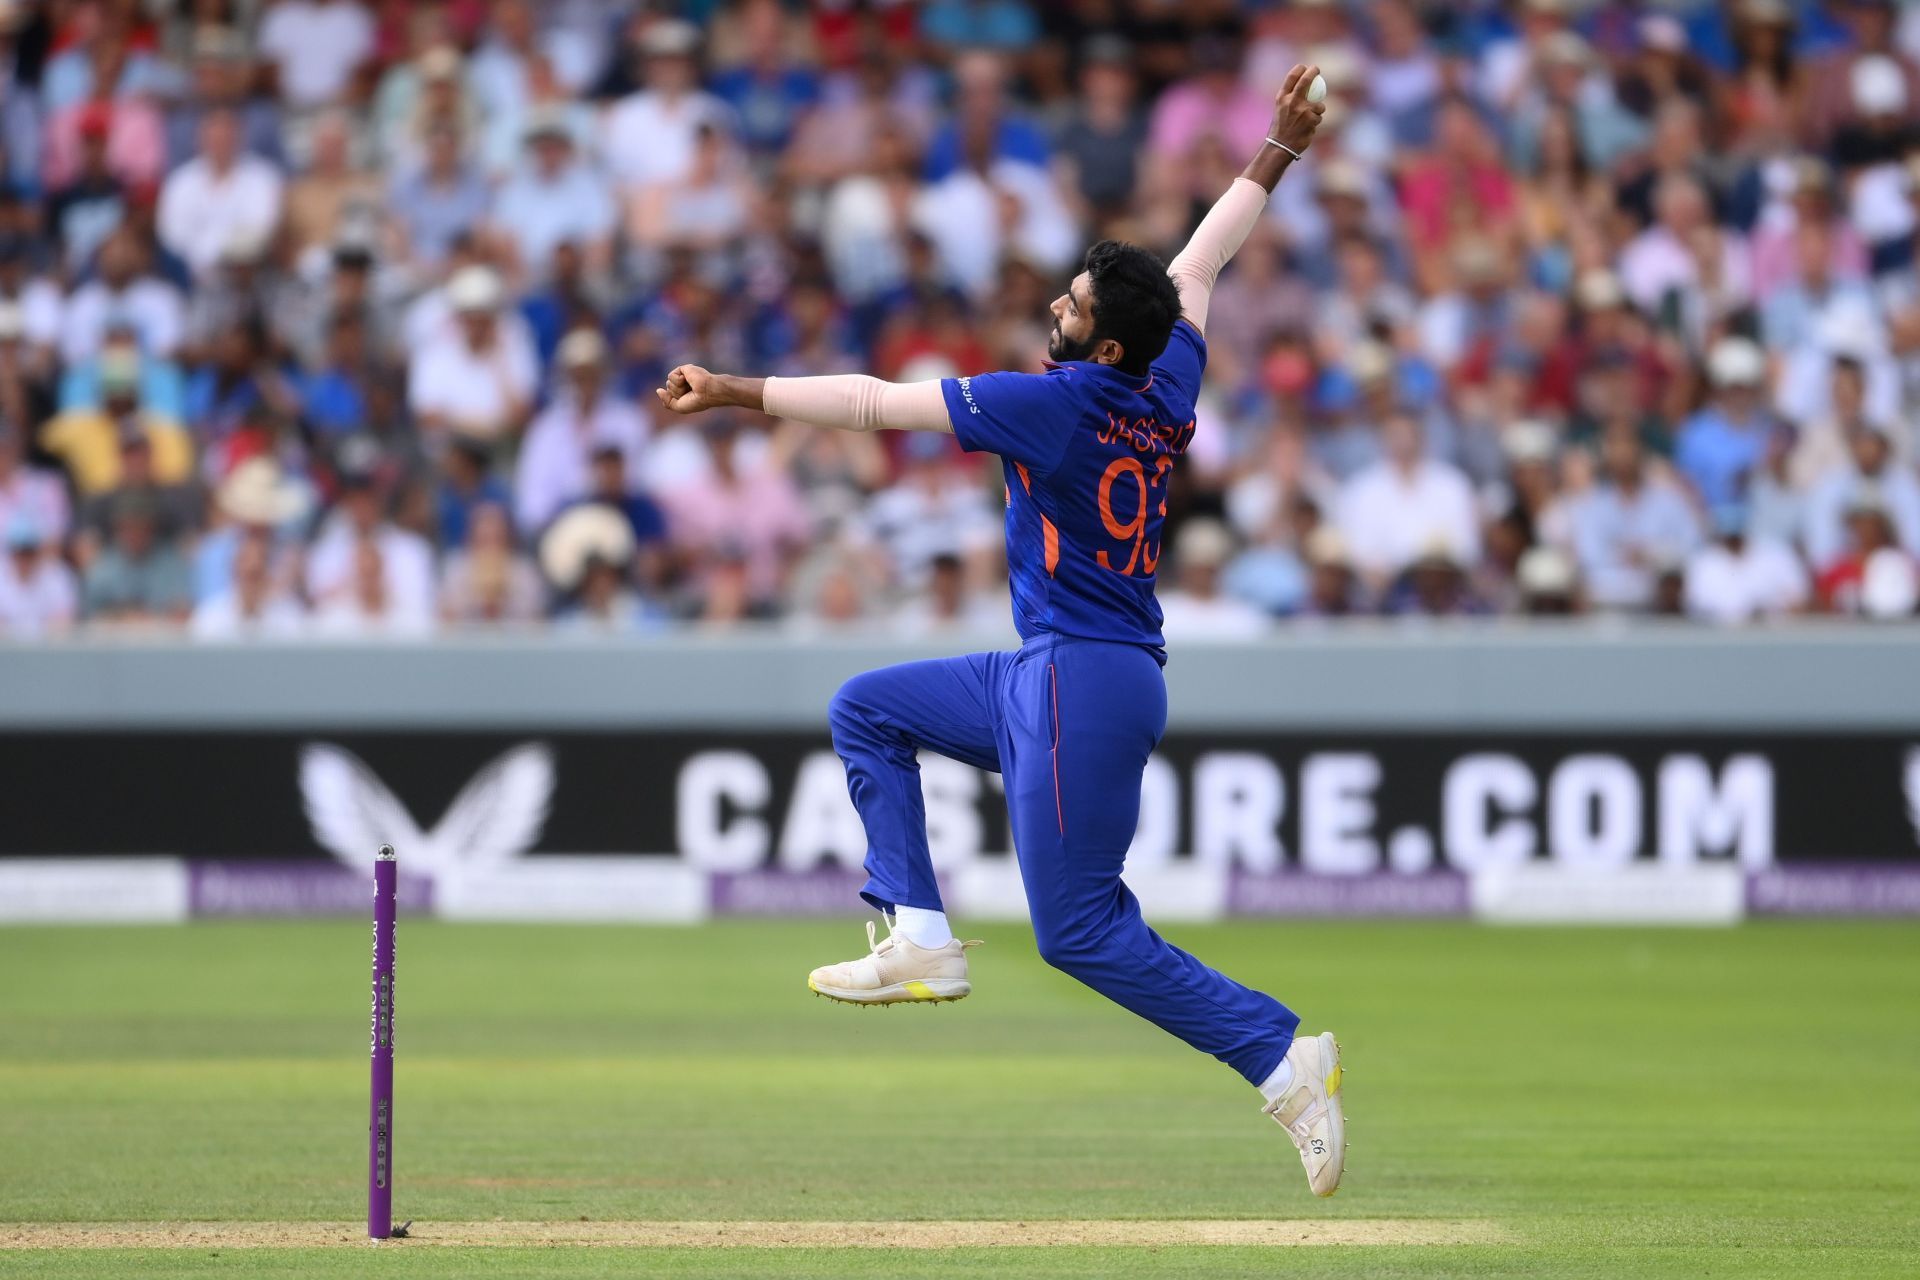 England v India - 2nd Royal London Series One Day International (Image: Getty)